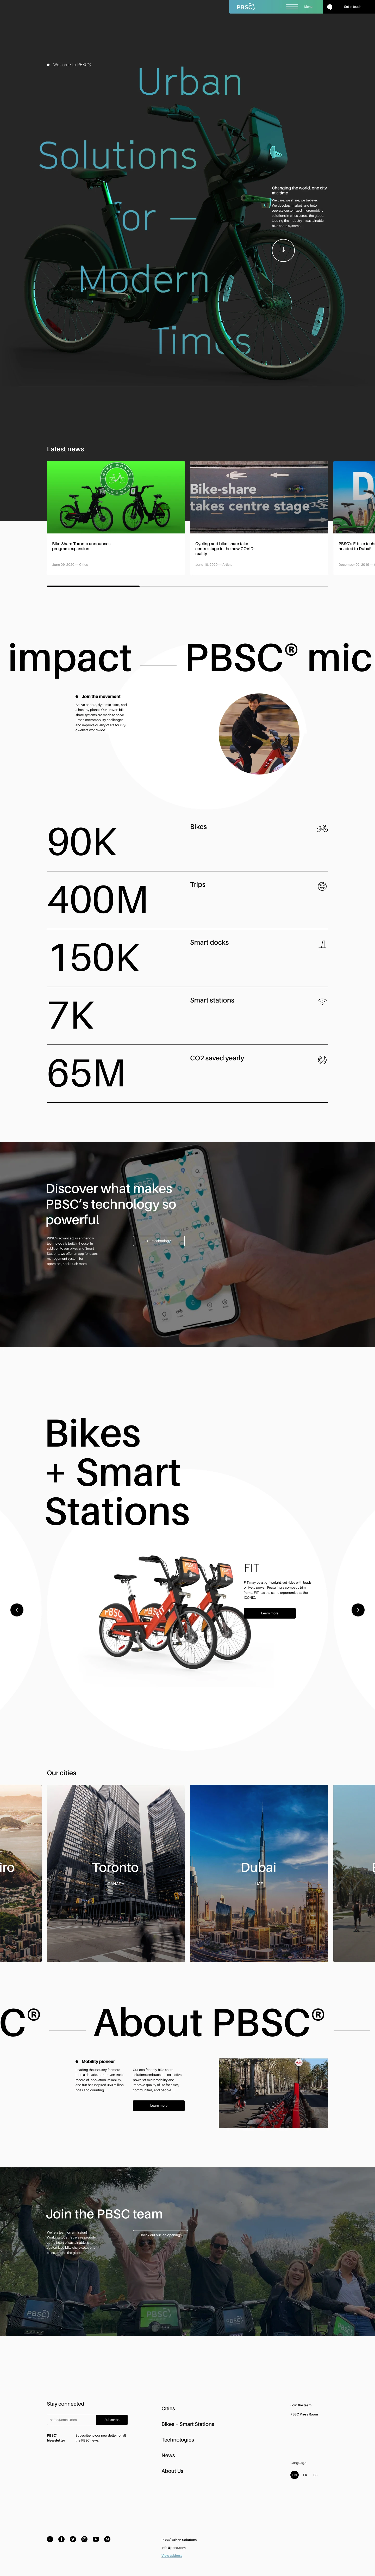 PBSC Urban Solutions Landing Page Example: PBSC Urban Solutions is a world leader in bike-sharing systems. Bikes, portable stations, mobile app, and management tool.